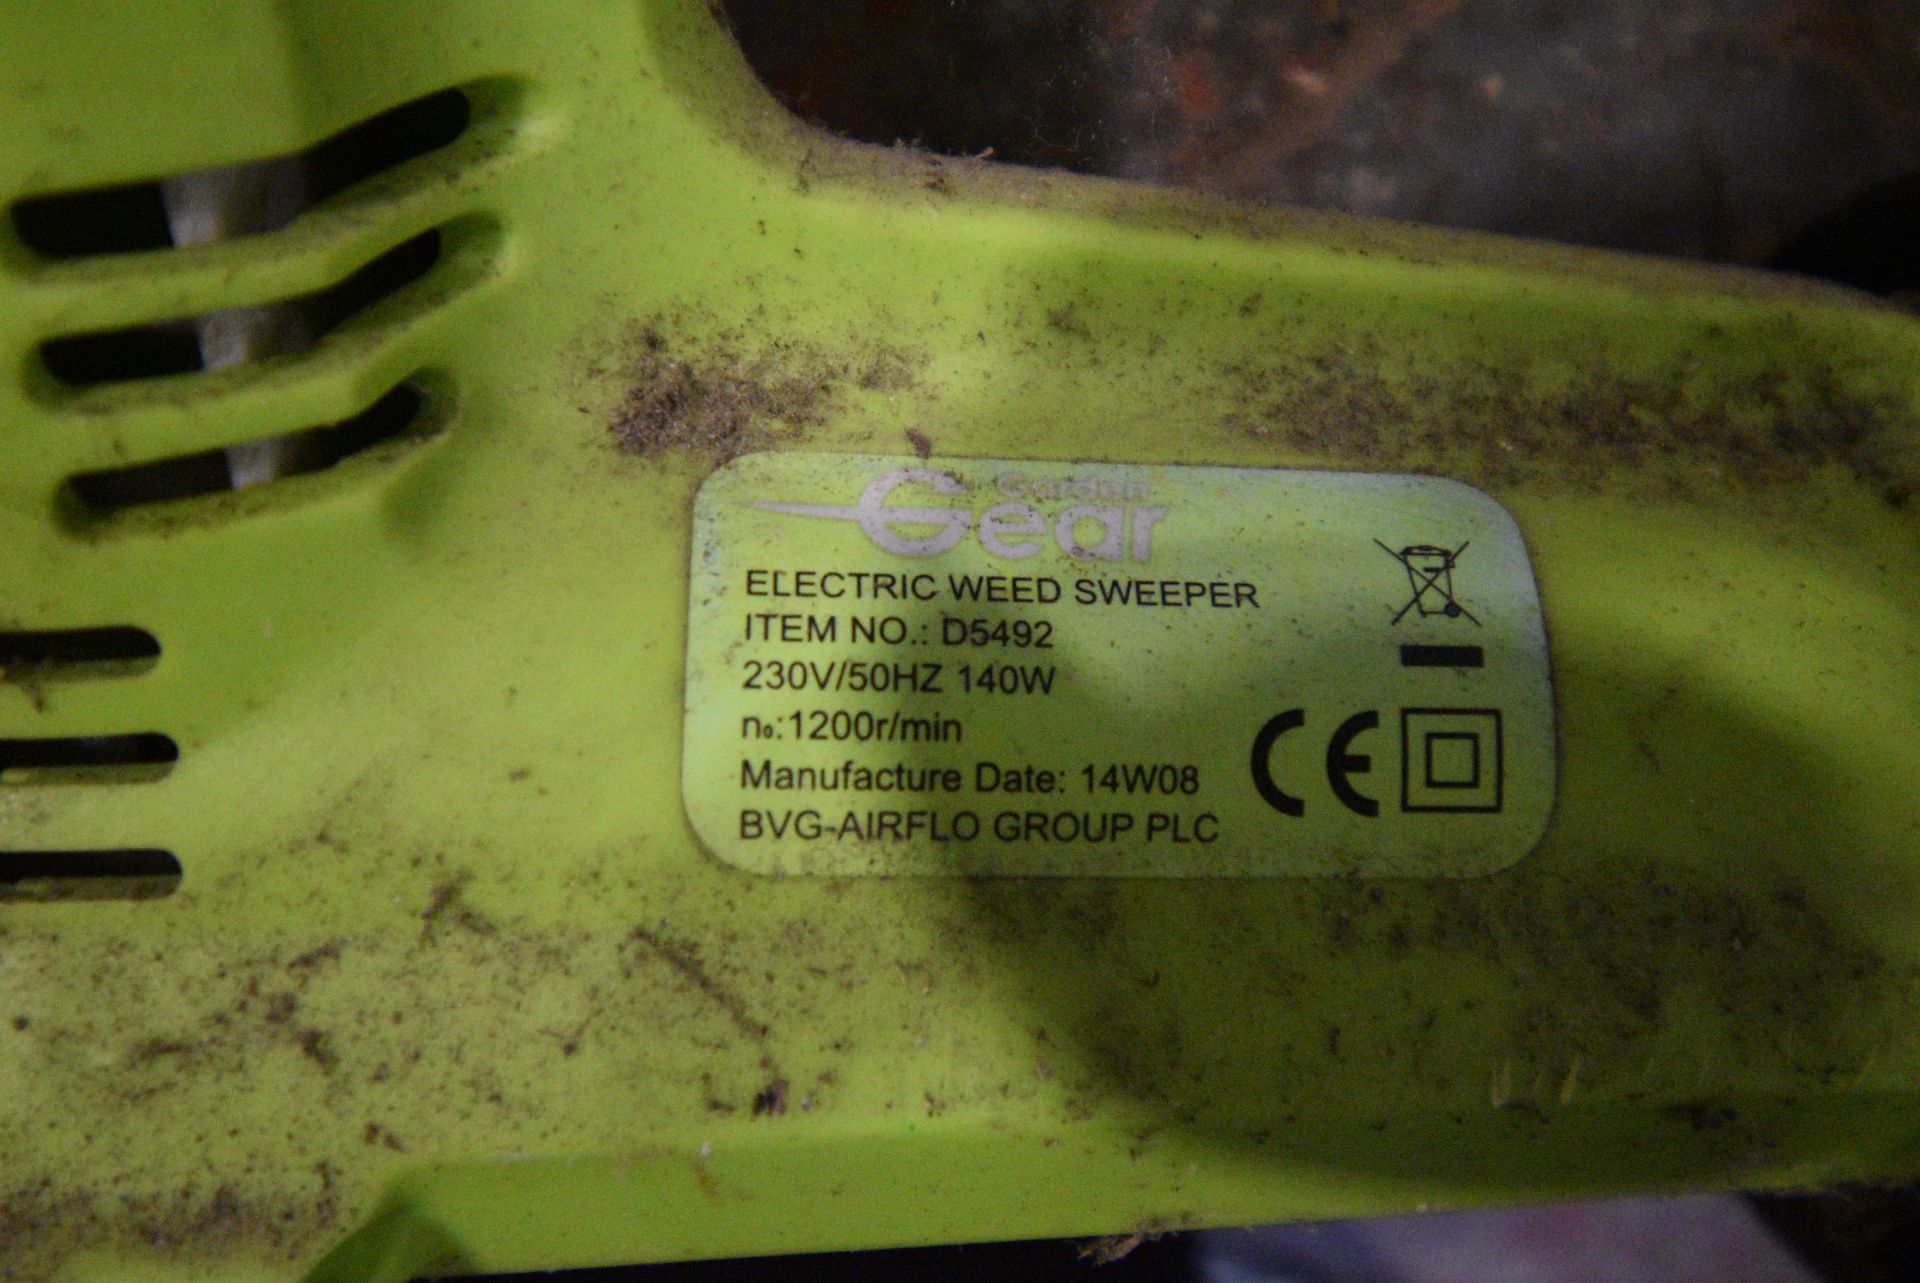 Electric Weed Sweeper 240v - Image 3 of 3